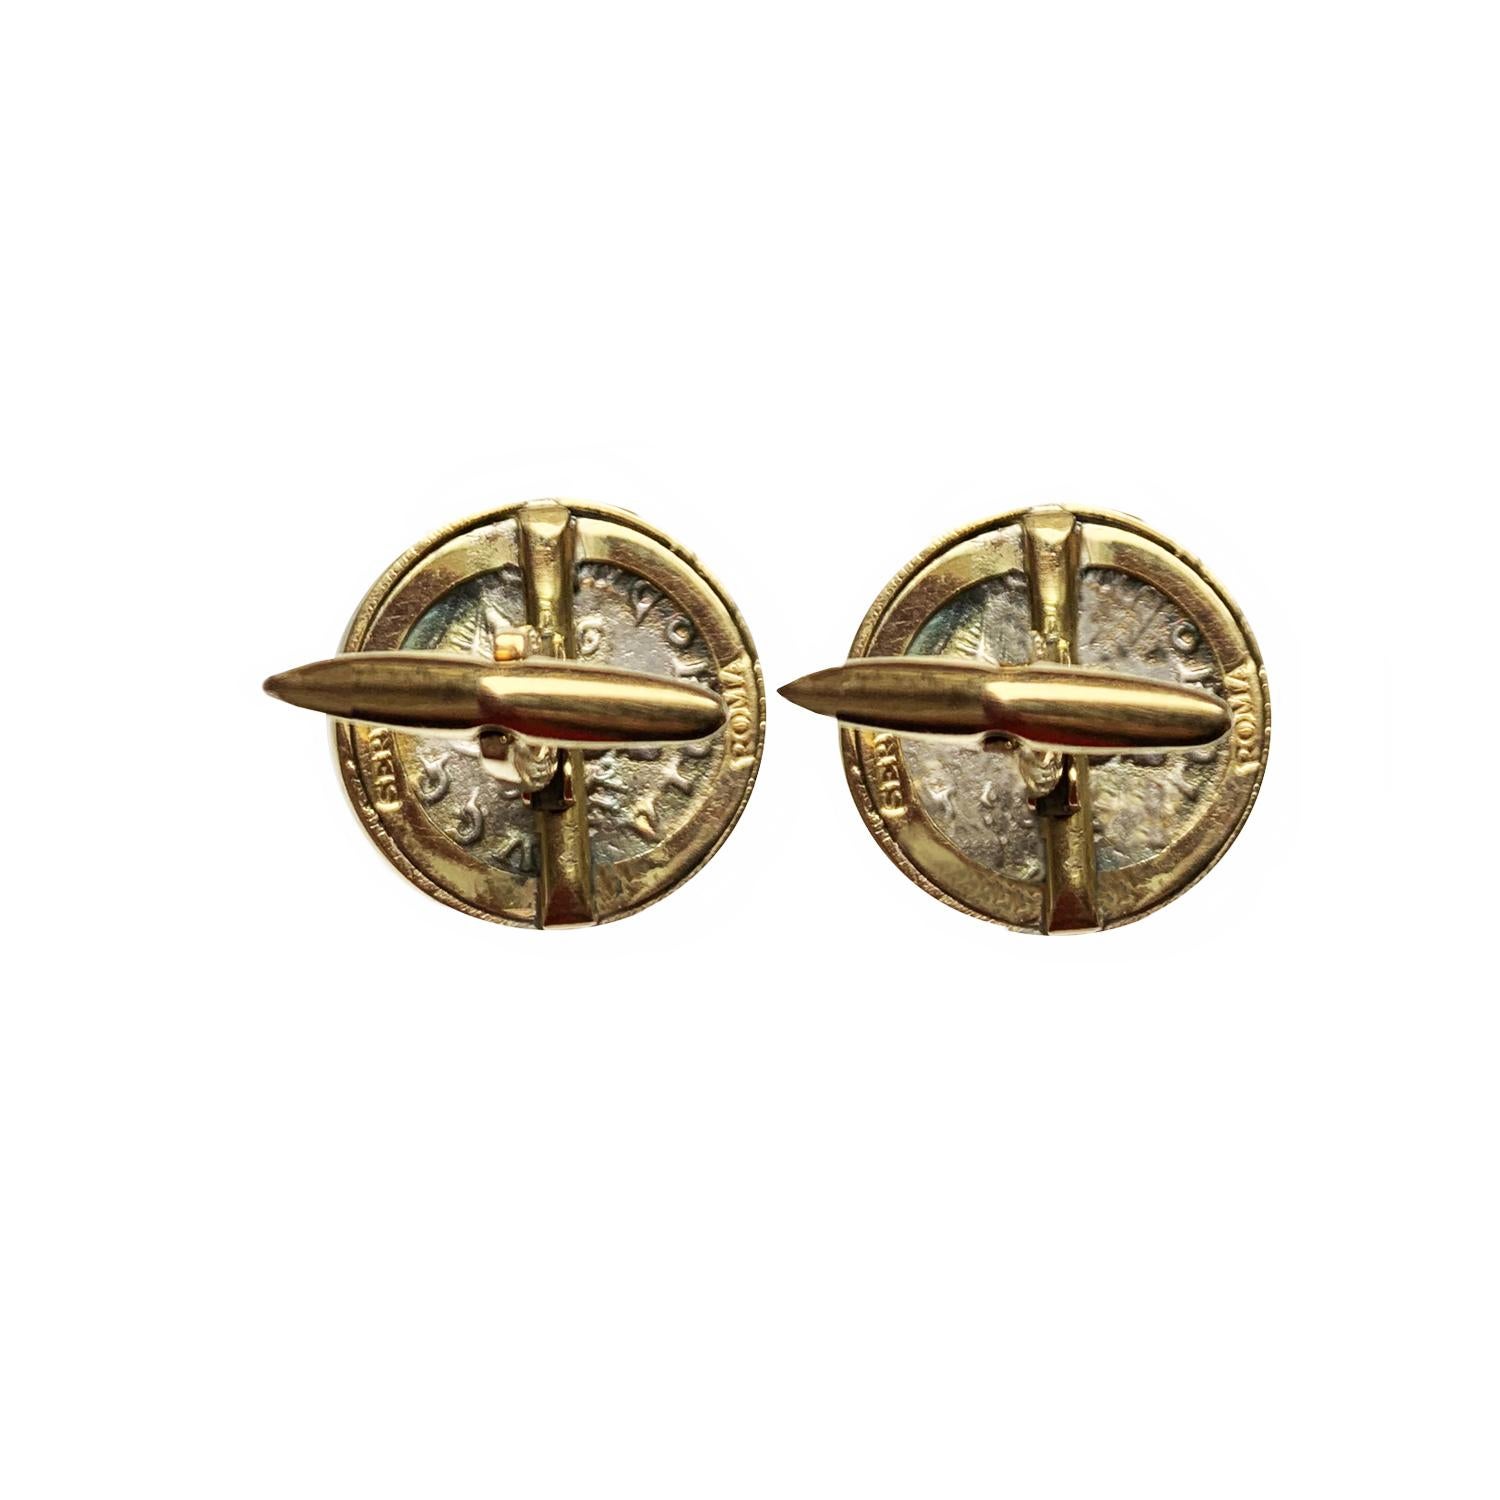 In these 18 kt gold cufflinks  authentic roman coins ( silver denarius-3th century A.D.) depicting Emperor Alexander Severus  and his wife Orbiana are set.
Alexander Severus  was Roman Emperor from 222 to 235 and the last emperor of the Severan